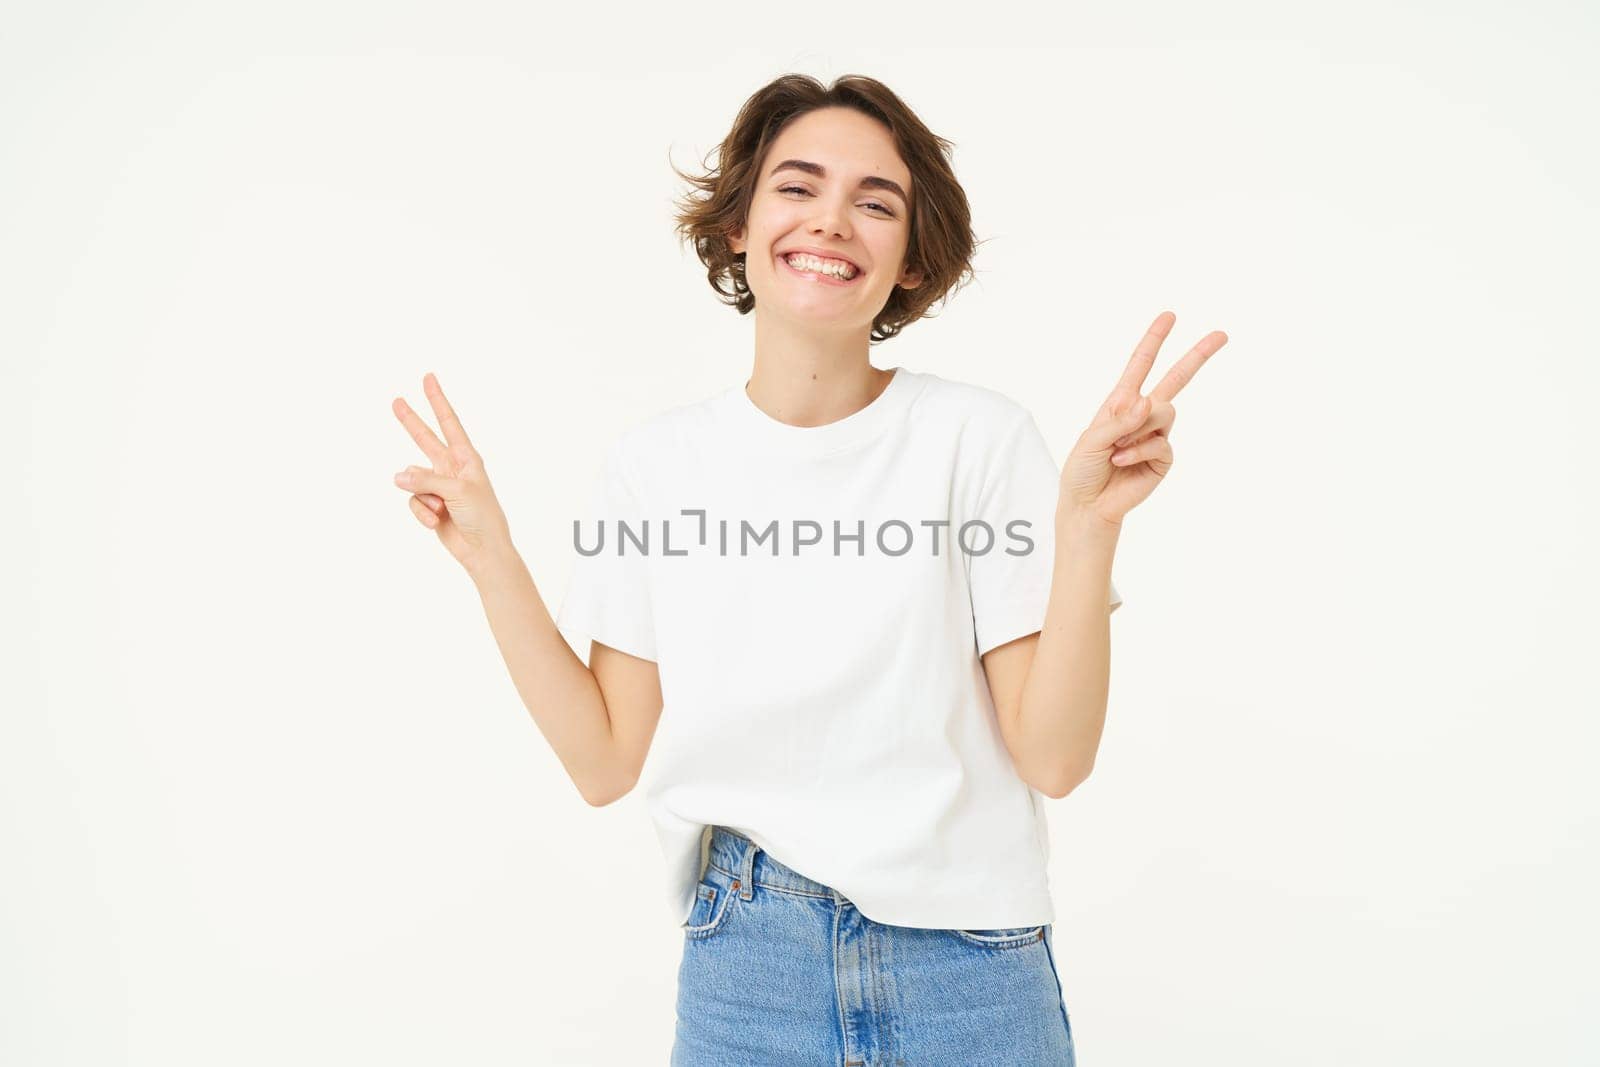 Portrait of happy and carefree woman, shows peace, v-sign gesture, having fun, posing for photo over white background.